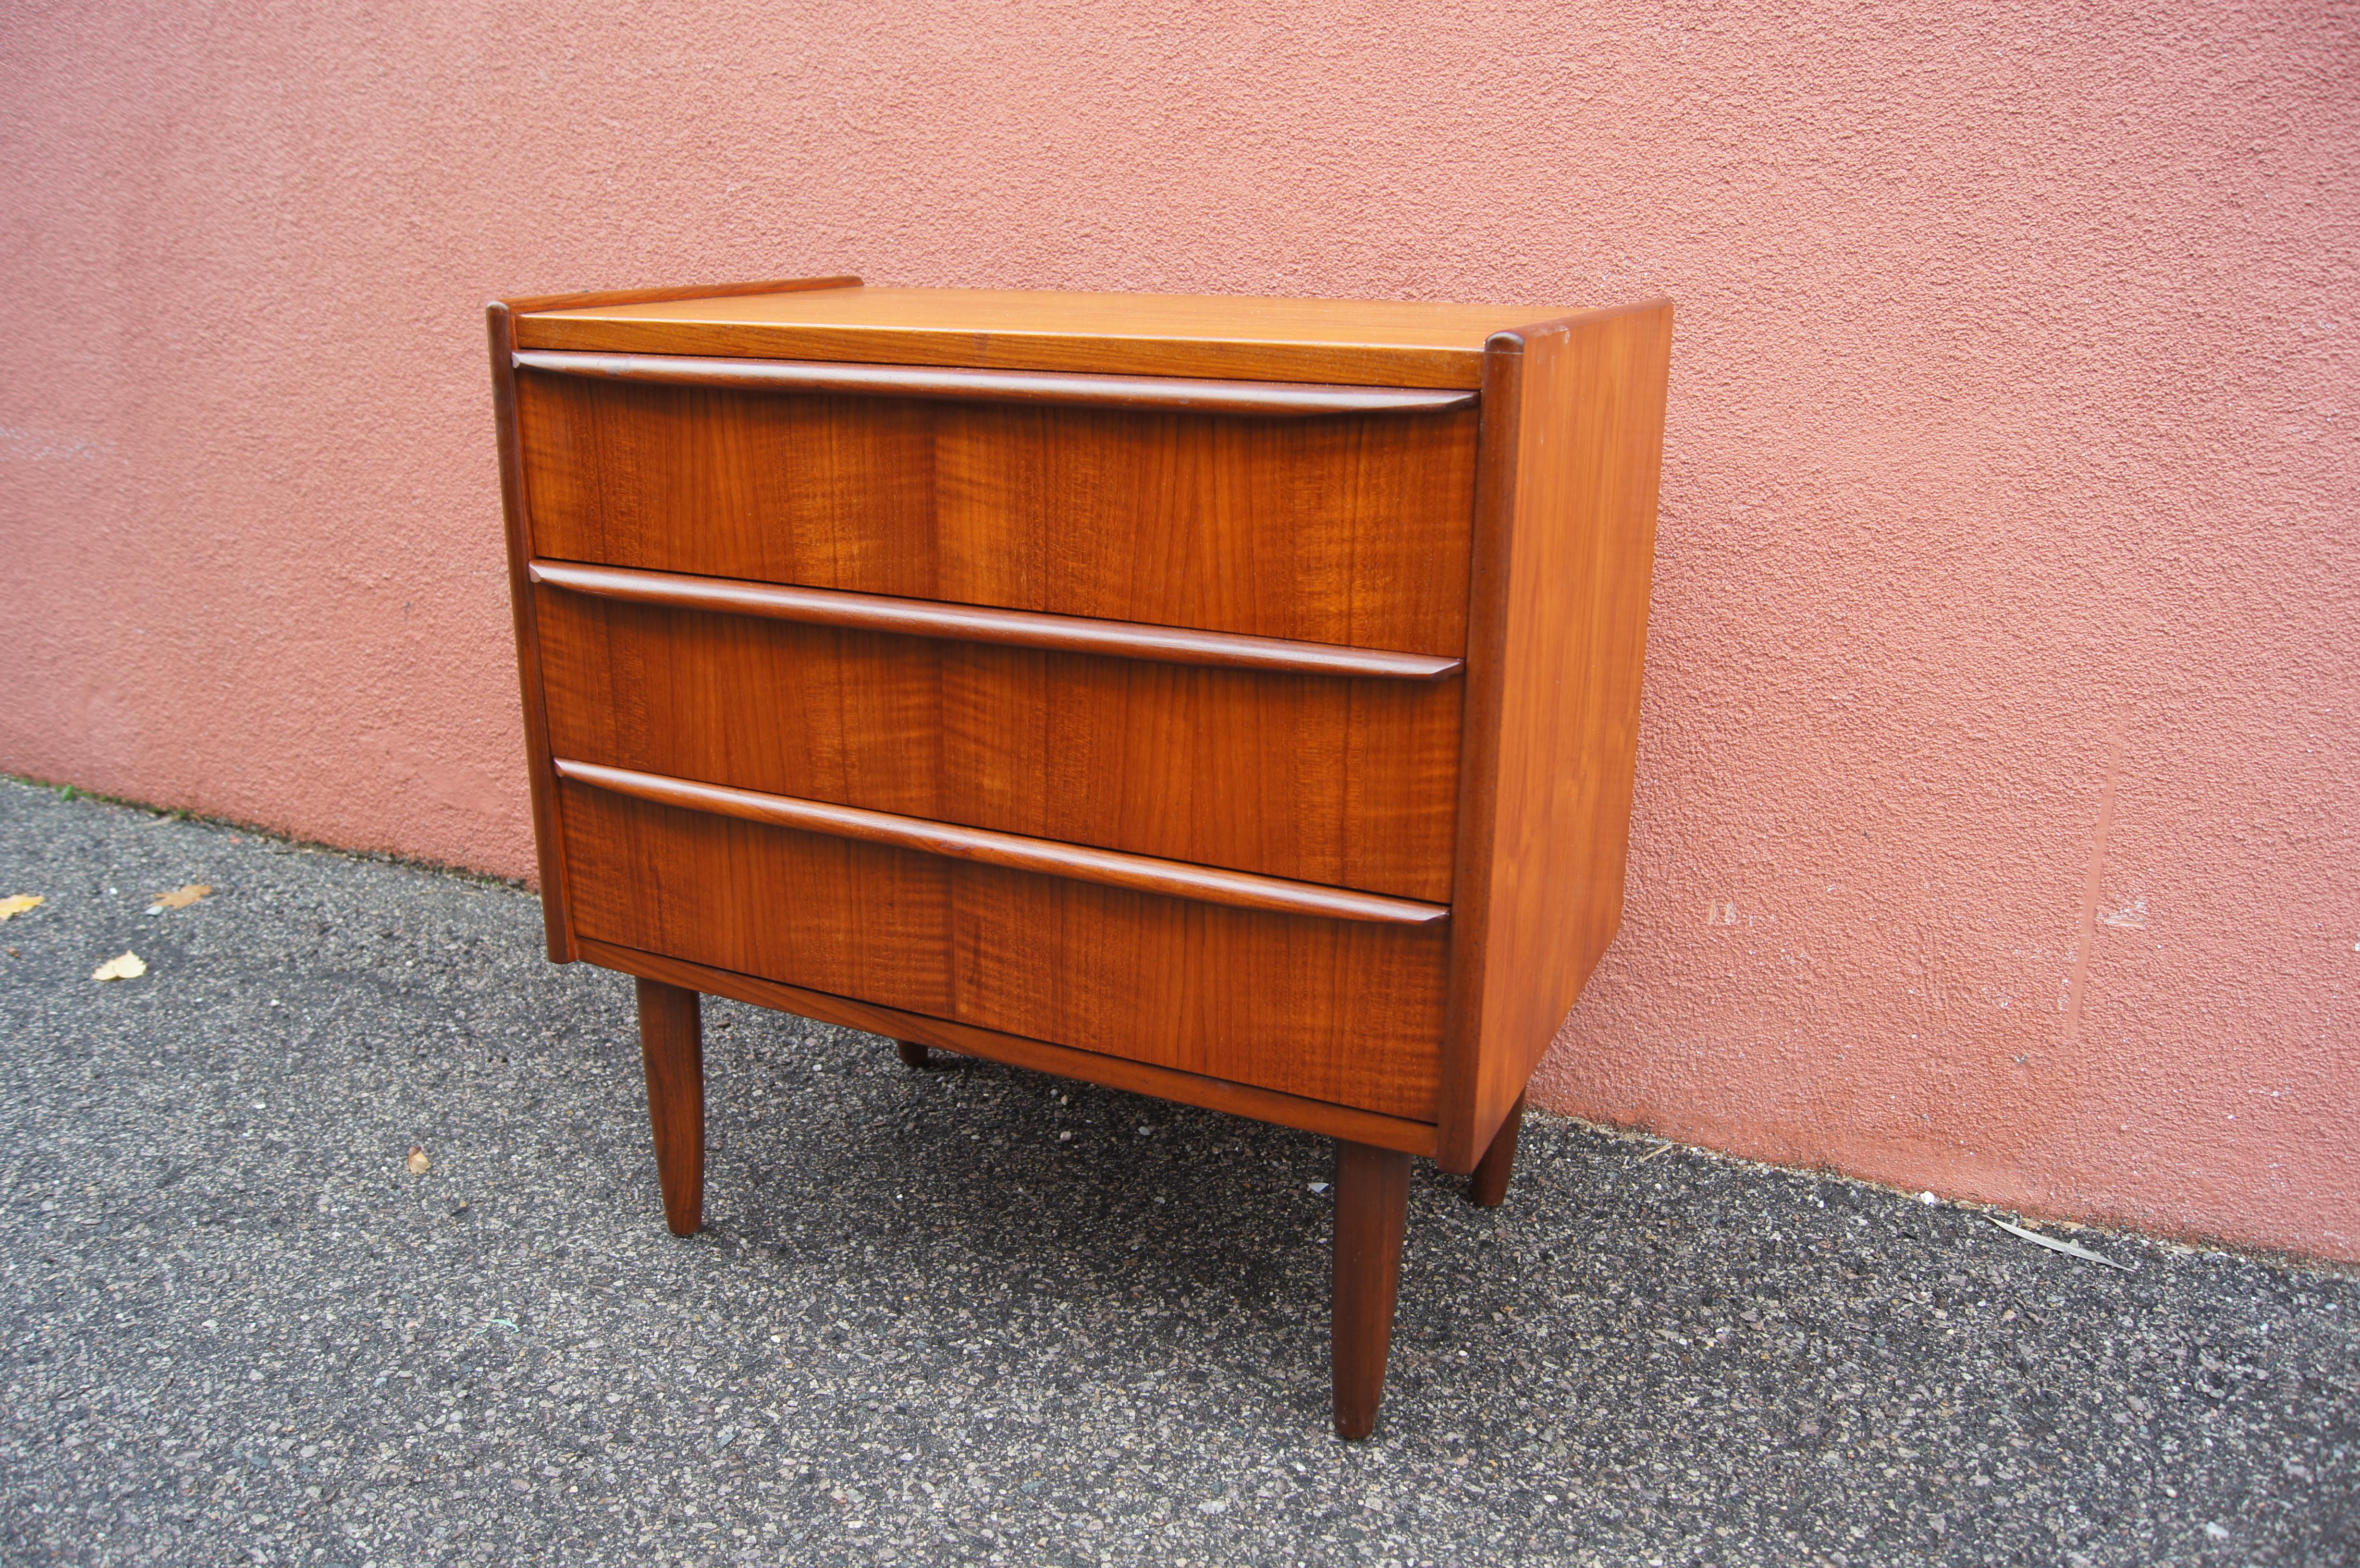 This small Danish modern chest or dresser comprises a case of beautifully grained teak with a raised lip at either side and slightly tapered legs. The three drawers feature integrated linear pulls.